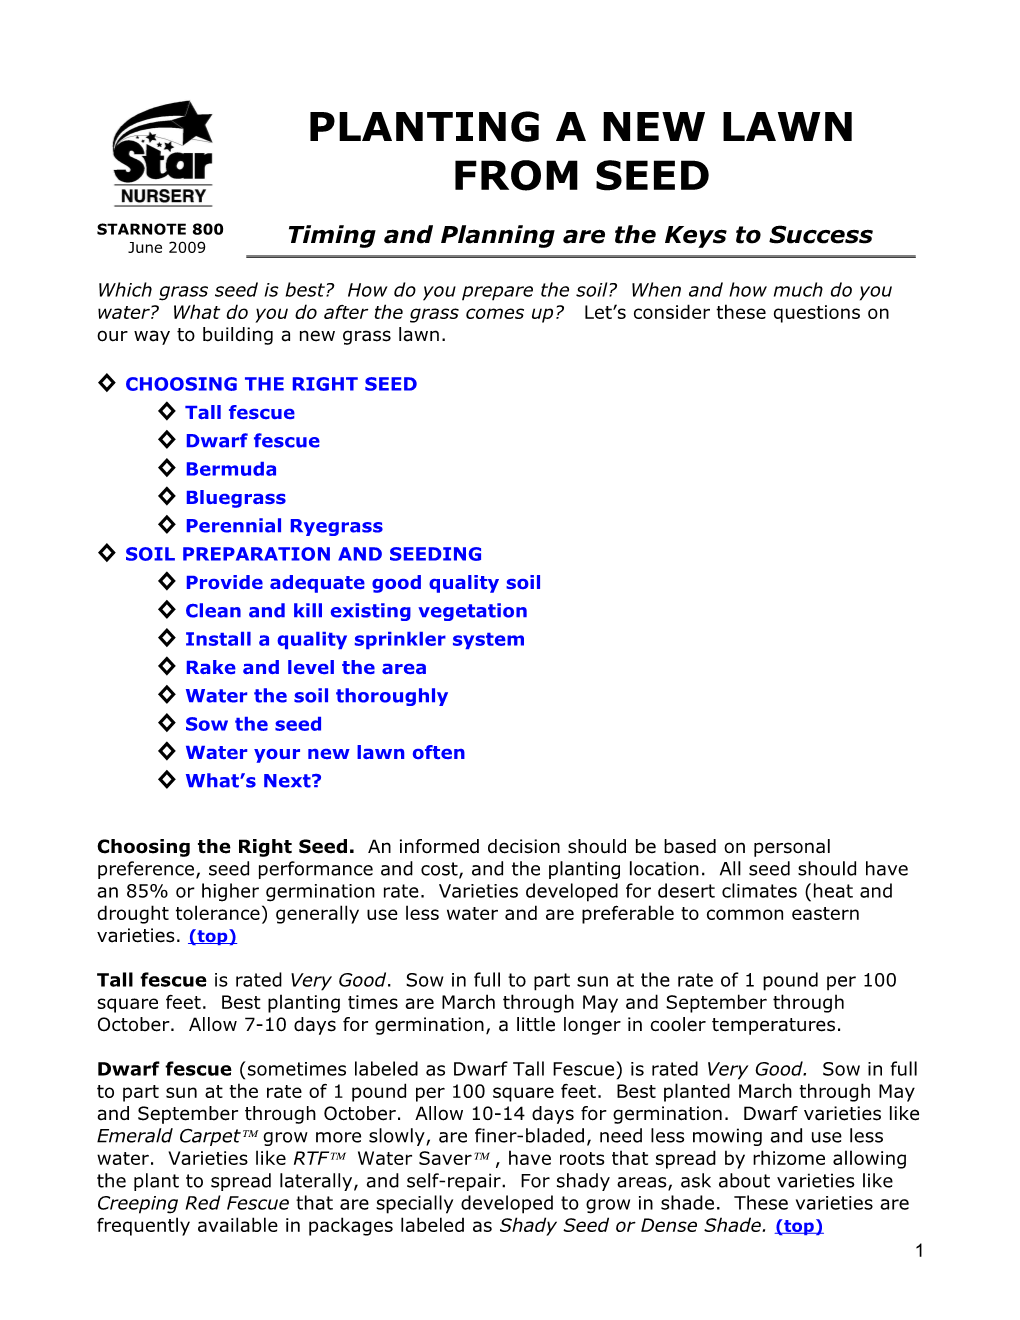 Choosing the Right Seed